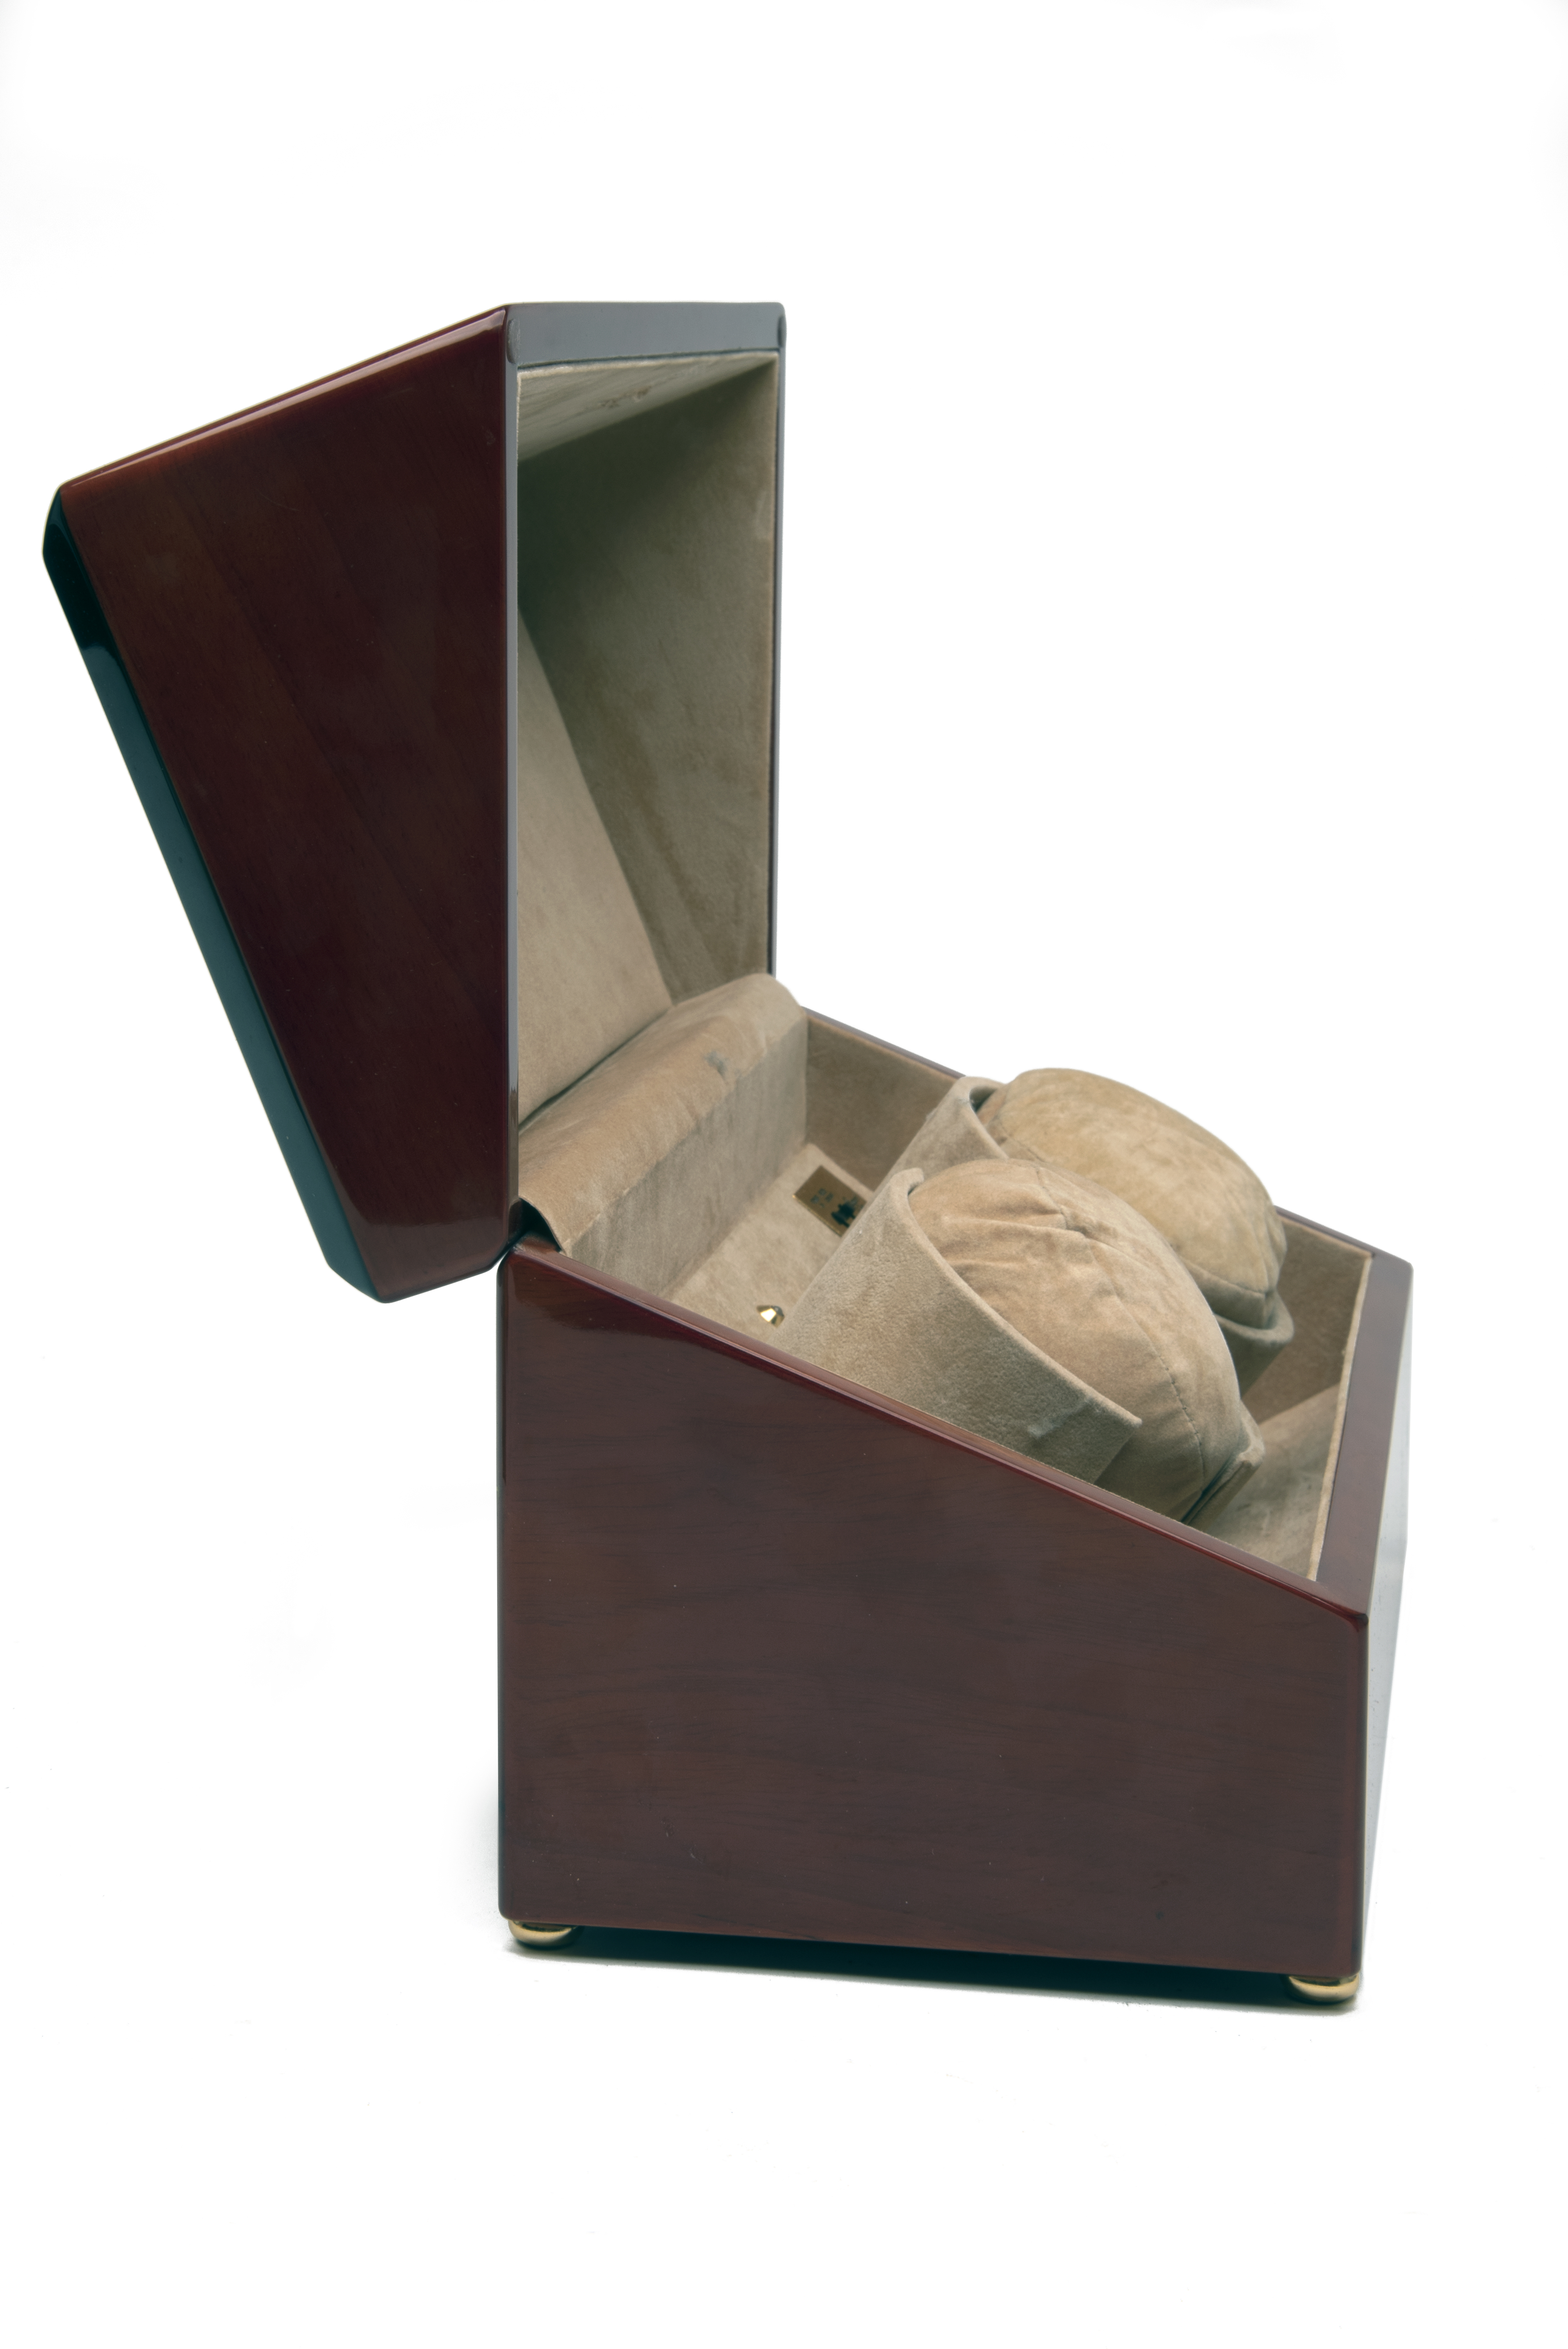 RAPPORT, LONDON A WOOD CASED DUAL AUTOMATIC WATCH-WINDER, mains (UK 240 Volt) or battery operated, - Image 2 of 4